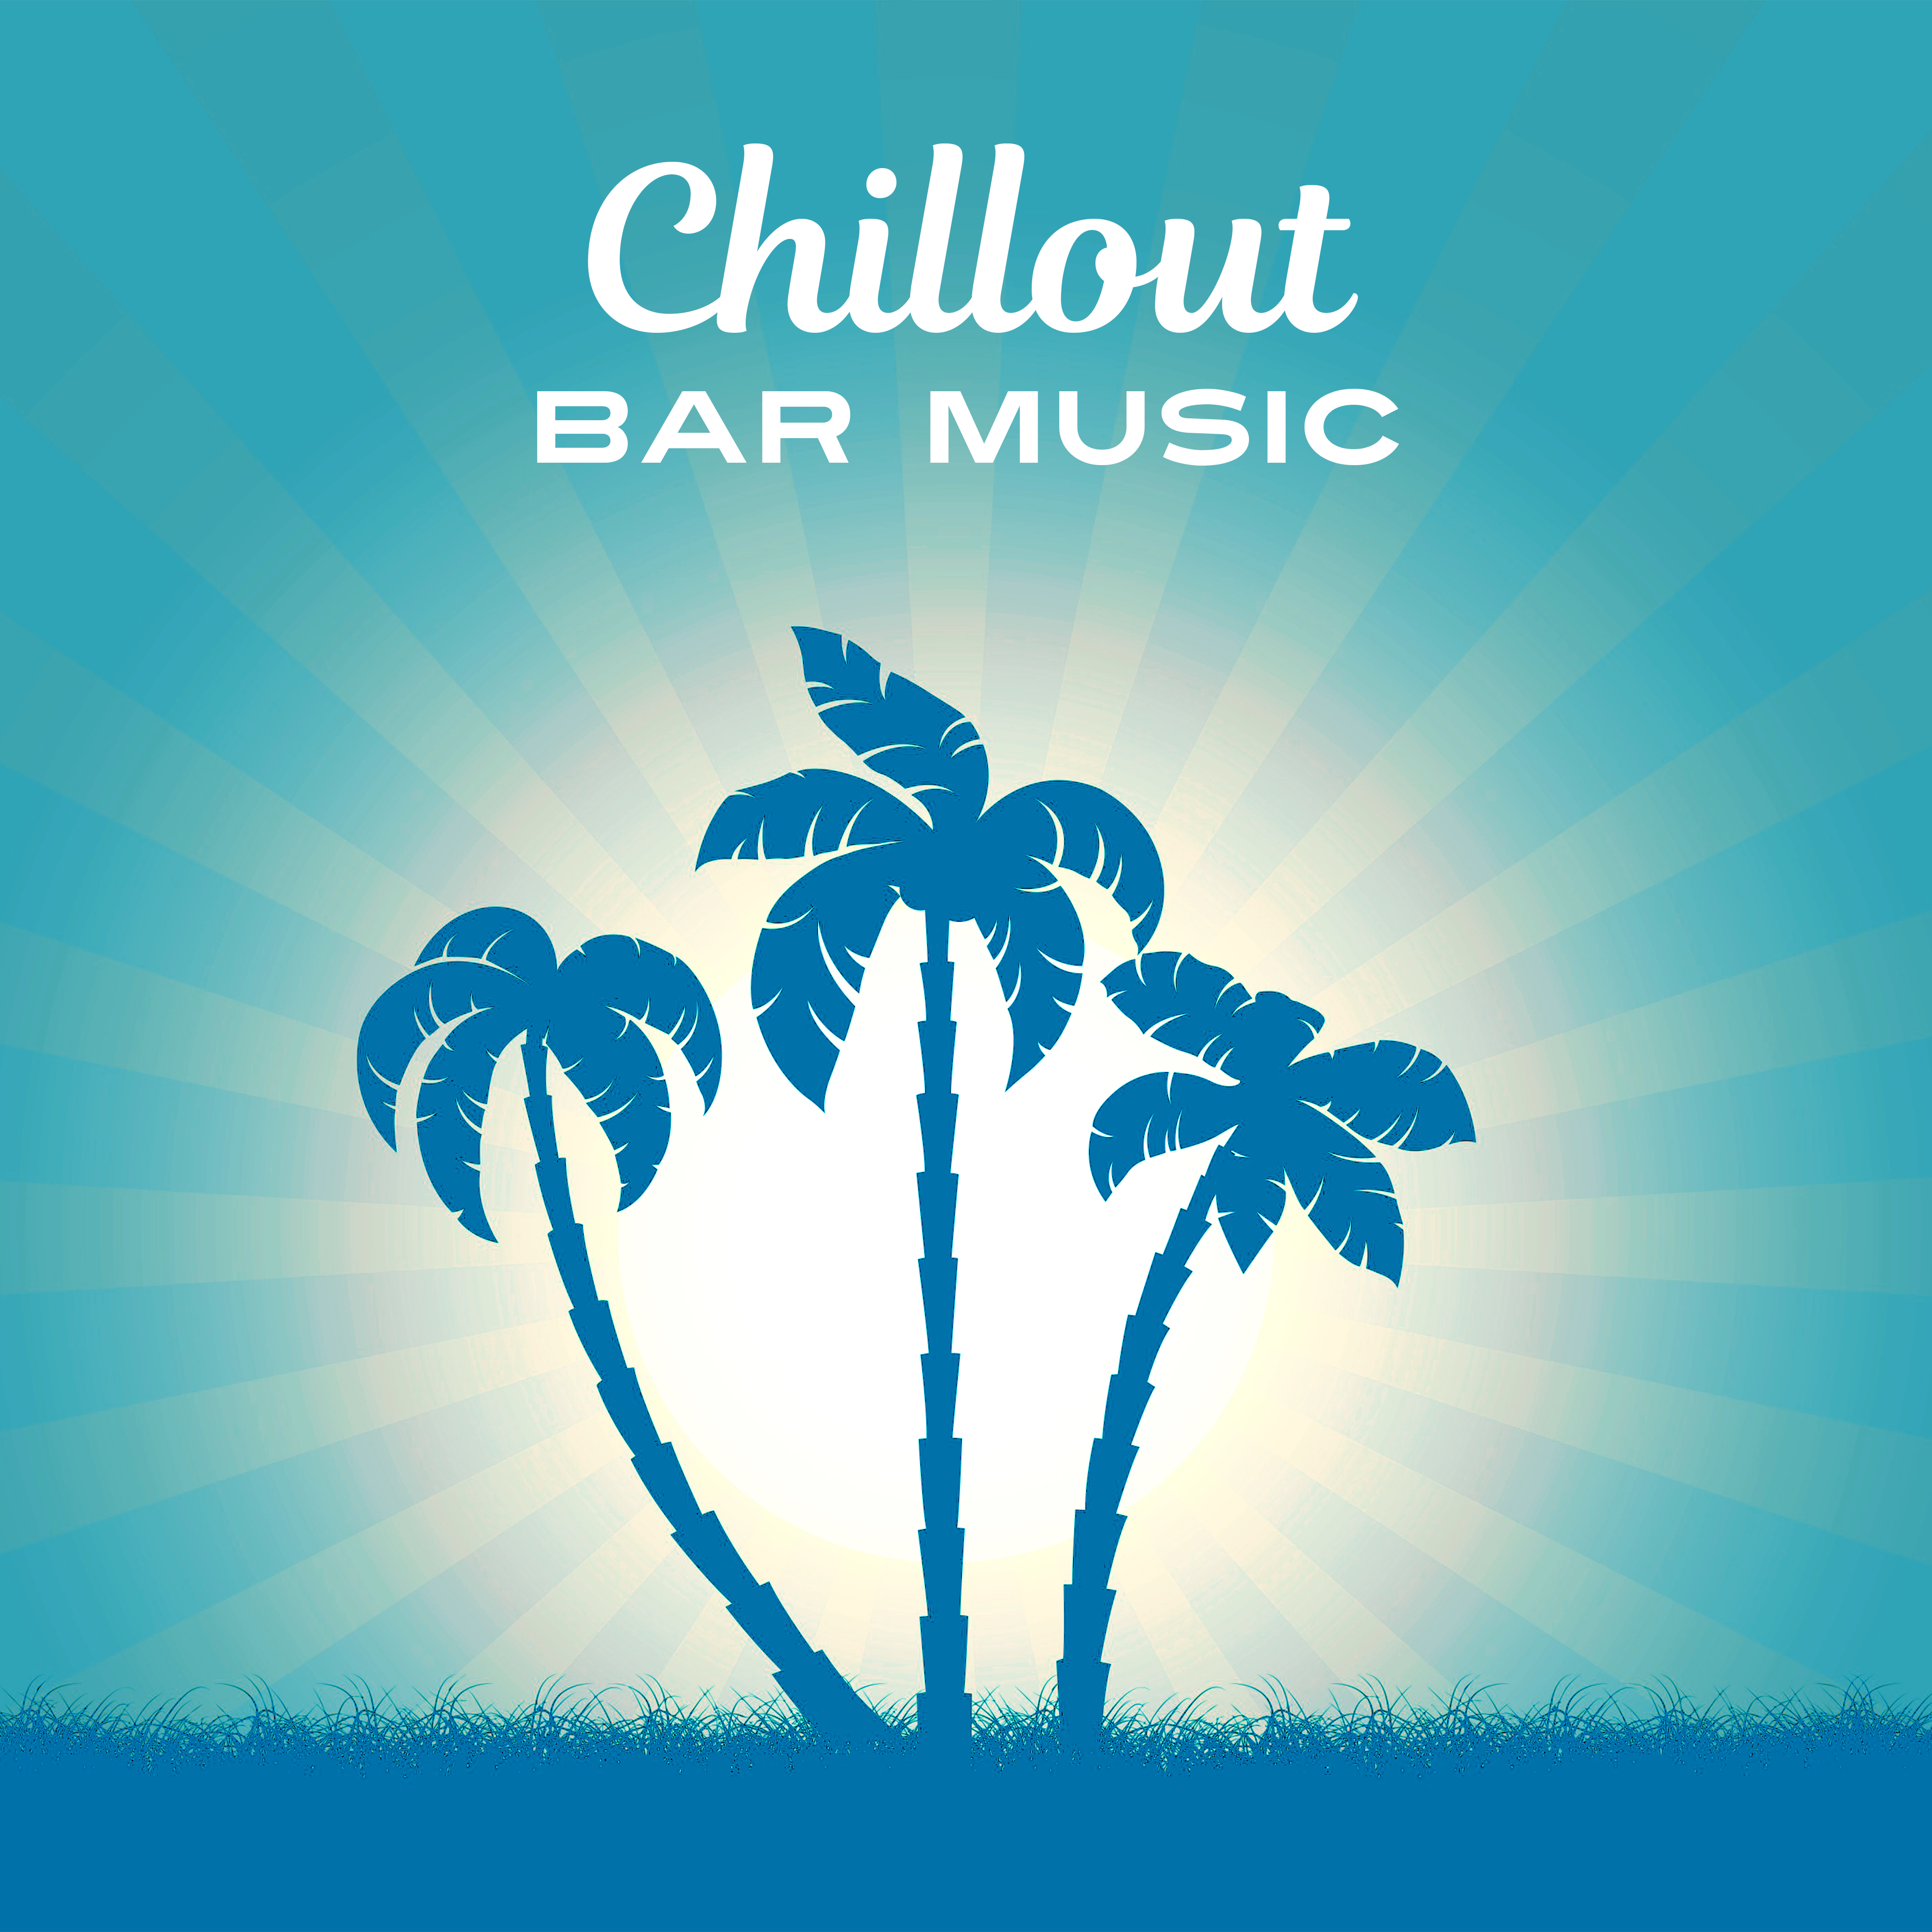 Chillout Bar Music  Deep Electronic Music, Chillout, Summer Vibes, Chill Out, Coffee Time on the Morning